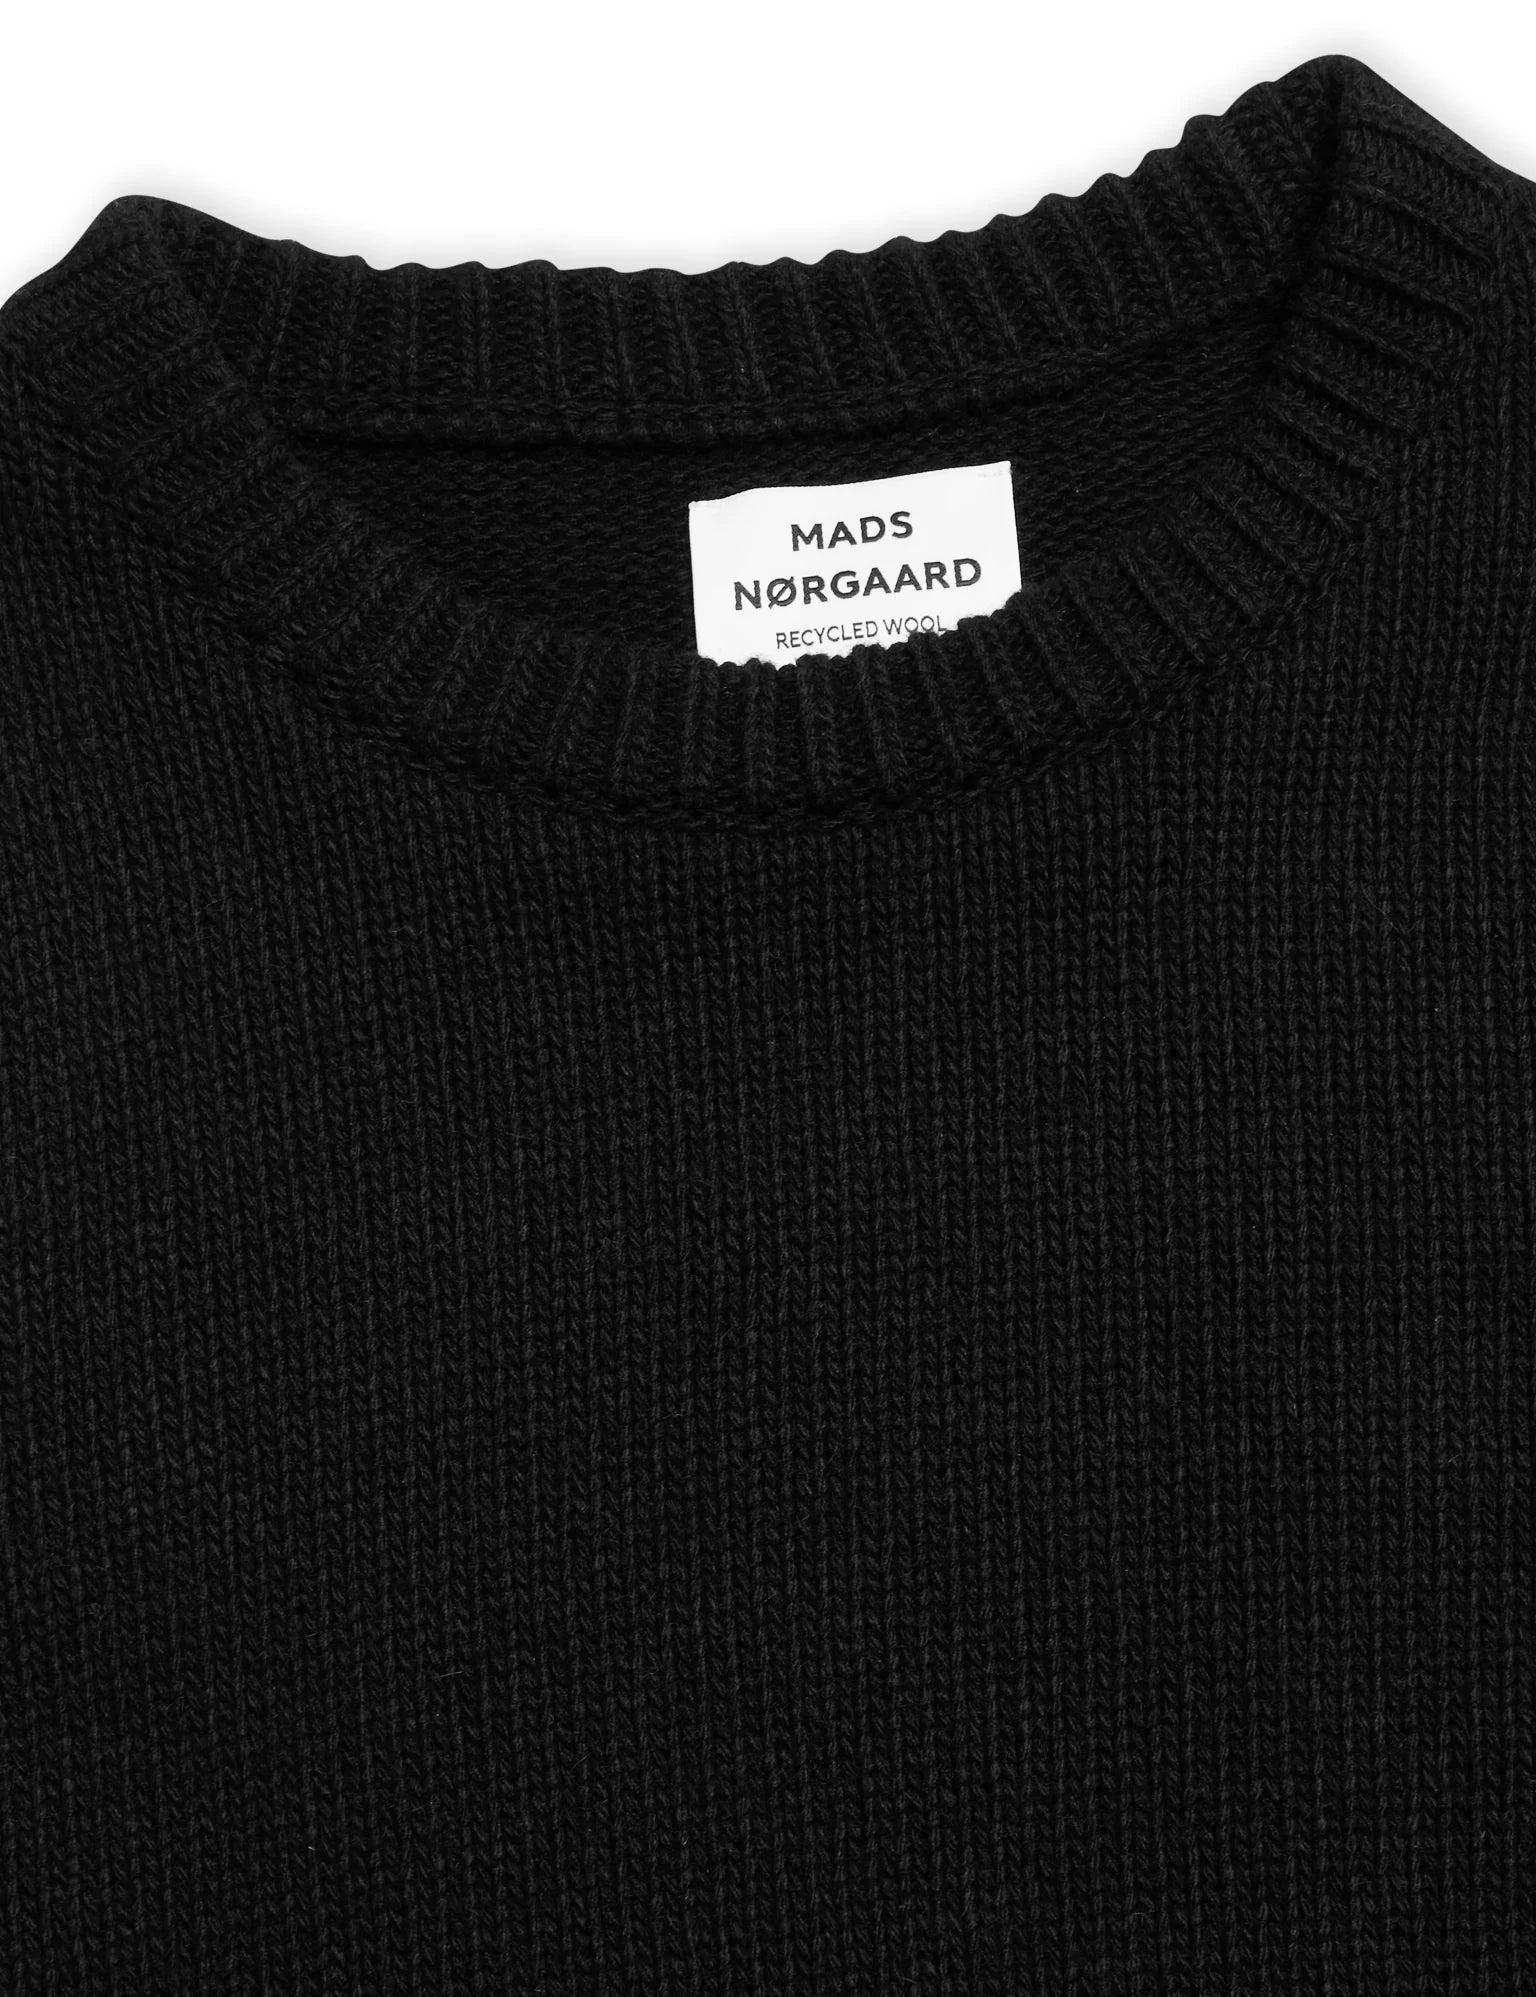 Kaily wool mix sweater in black